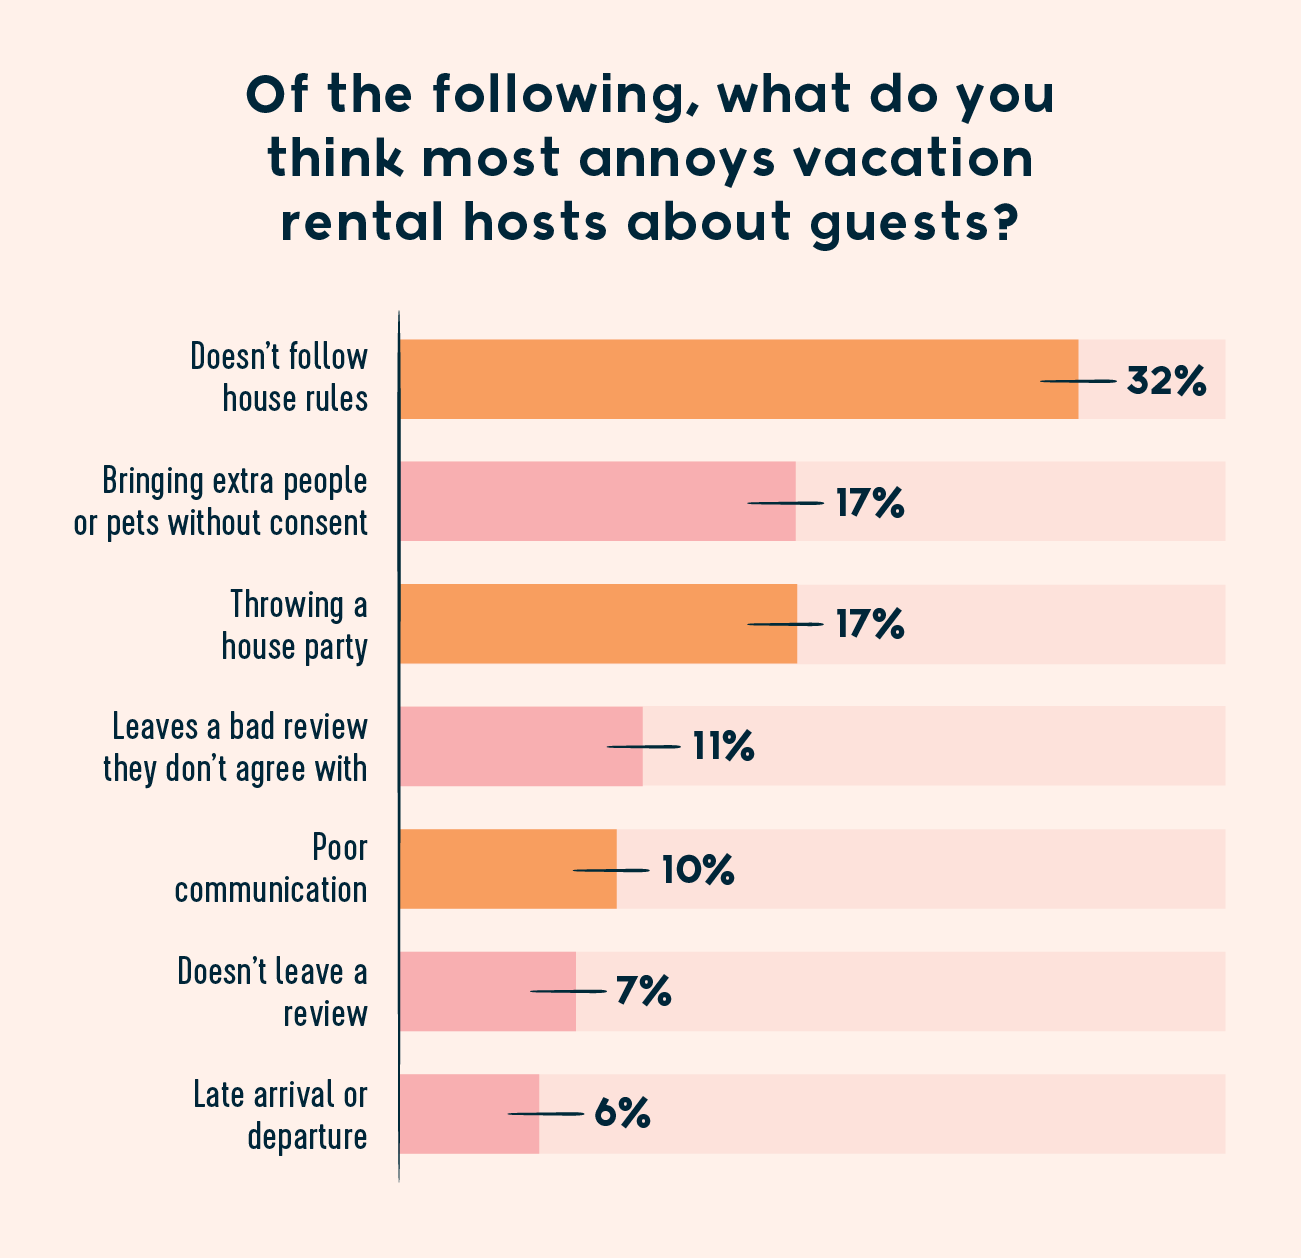 statistics of what annoys vacation rental hosts about guests